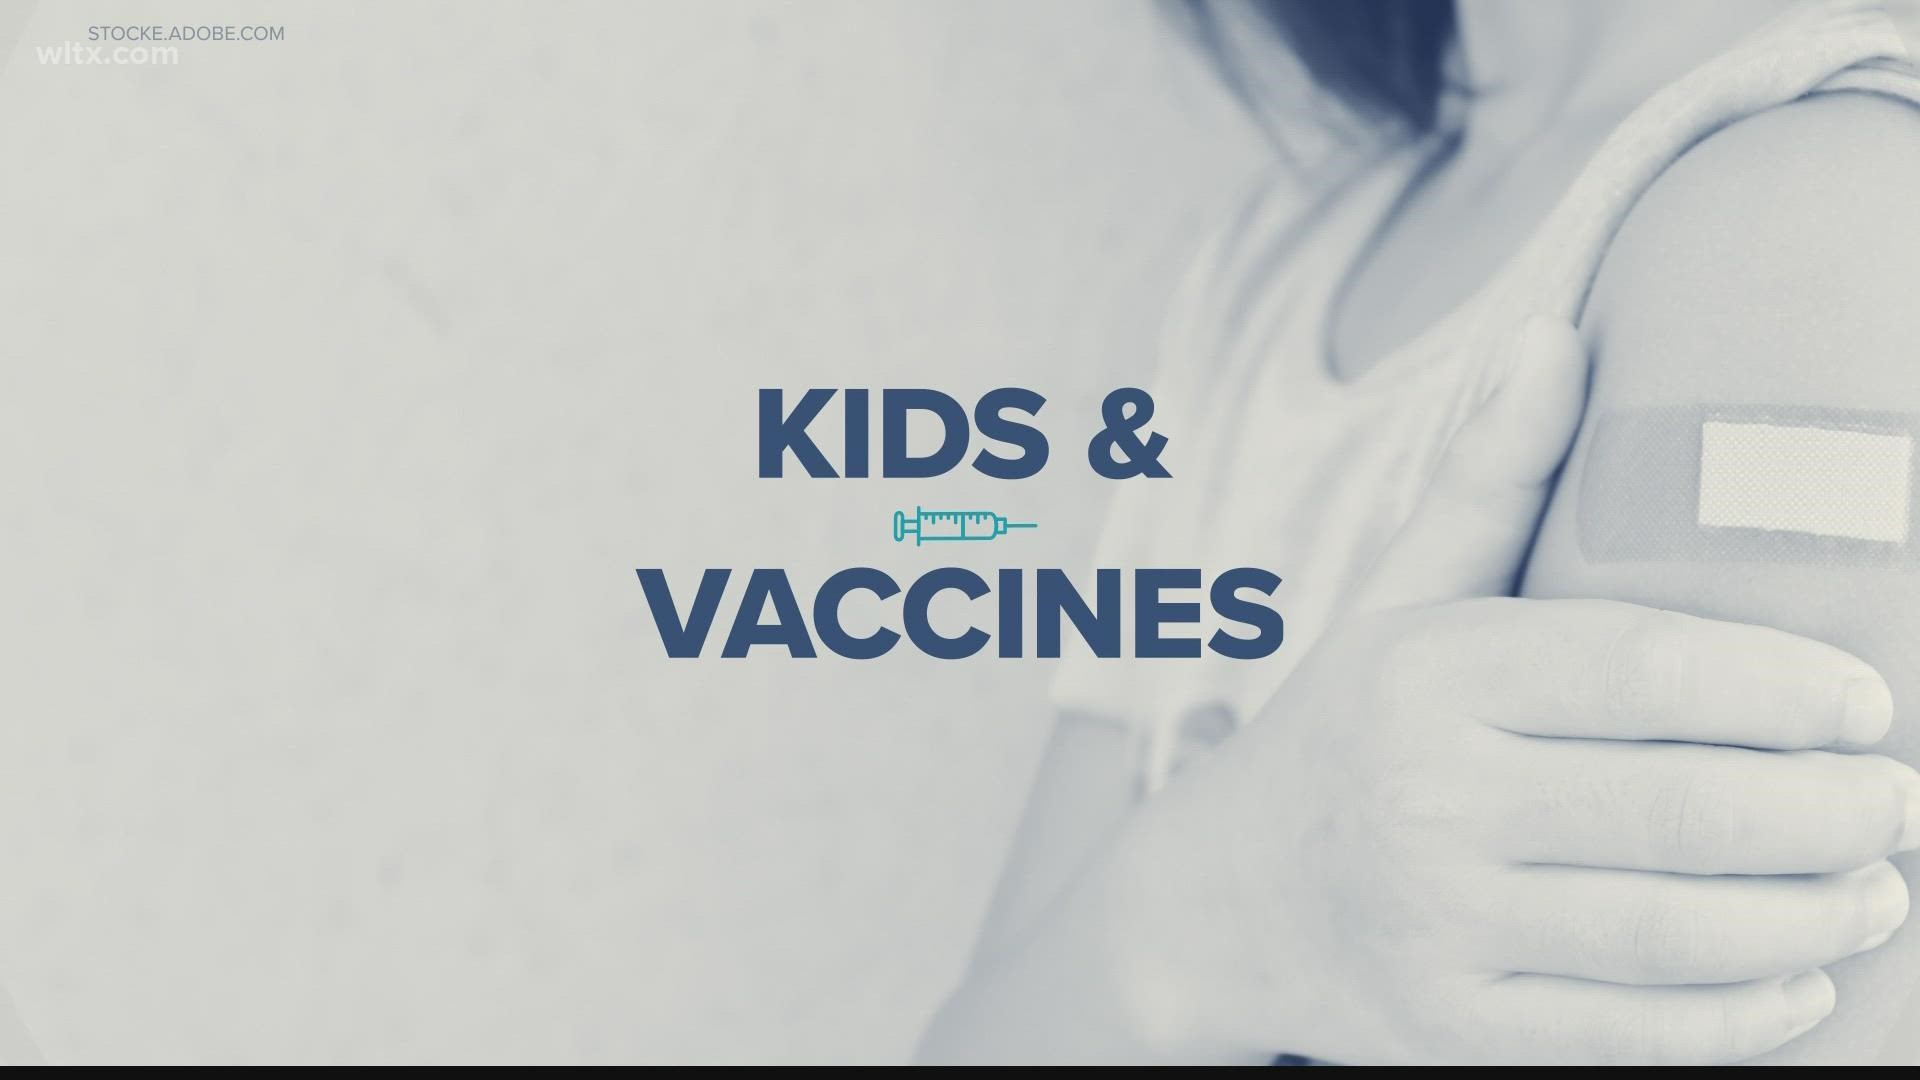 Moderna is asking the FDA to let the country's youngest children get their COVID-19 vaccine. Kids under 4 years old have no vaccine protecting against the virus.